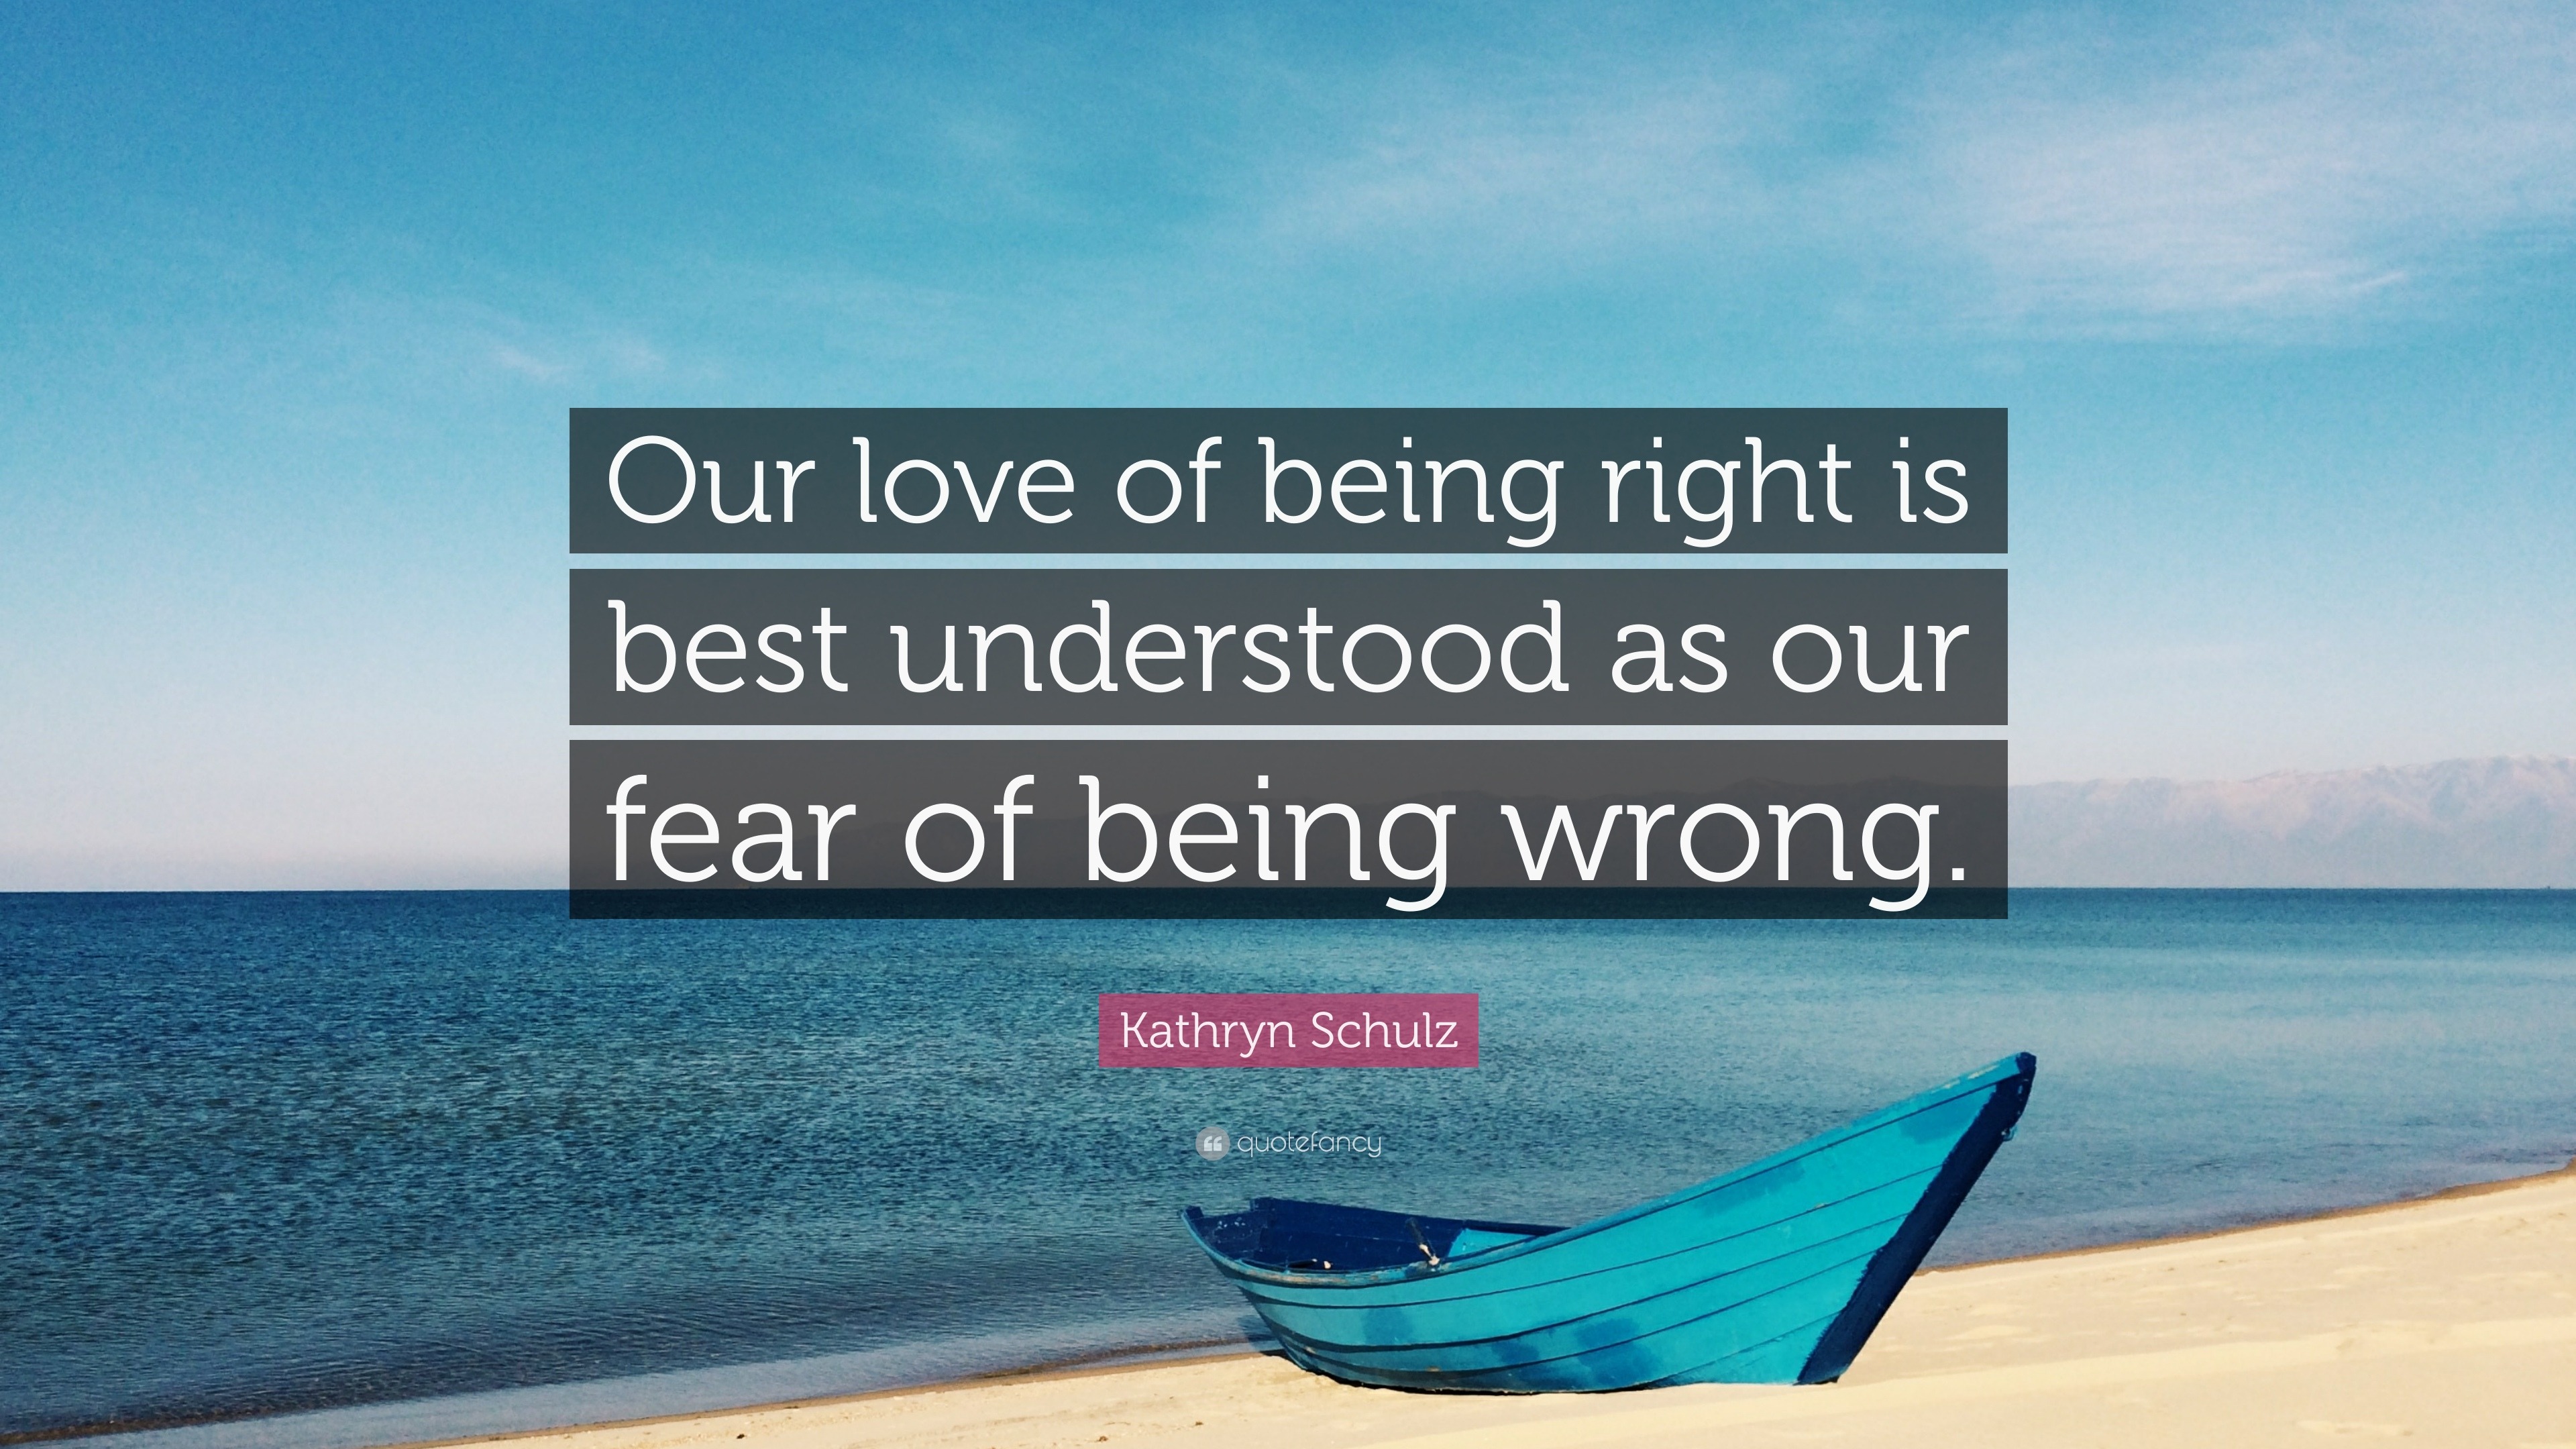 Kathryn Schulz Quote: “Our love of being right is best understood as ...